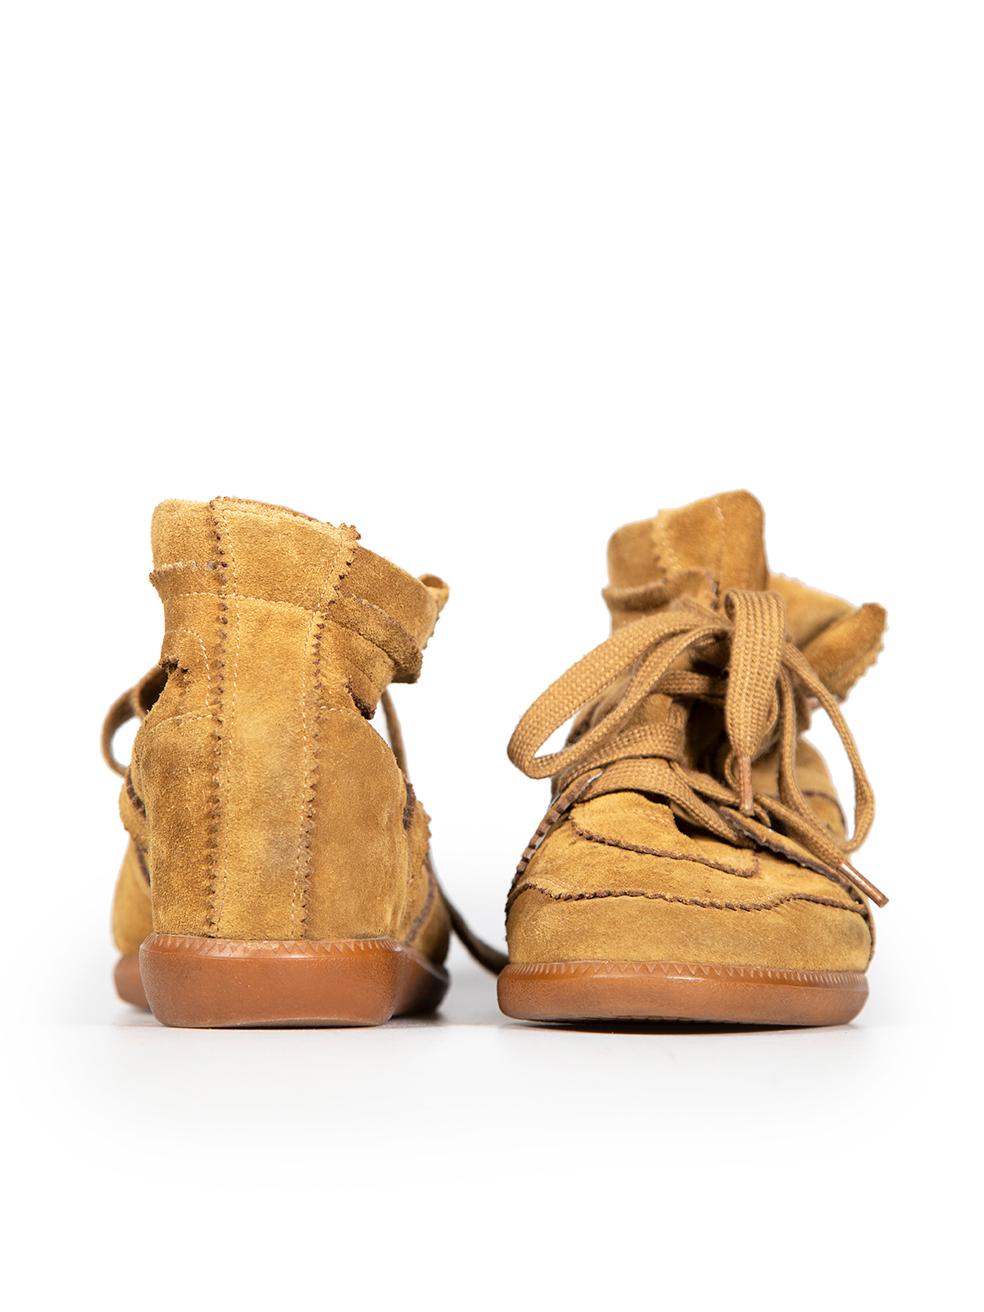 Isabel Marant Brown Suede High-Top Wedge Trainers Size IT 40 In Good Condition For Sale In London, GB